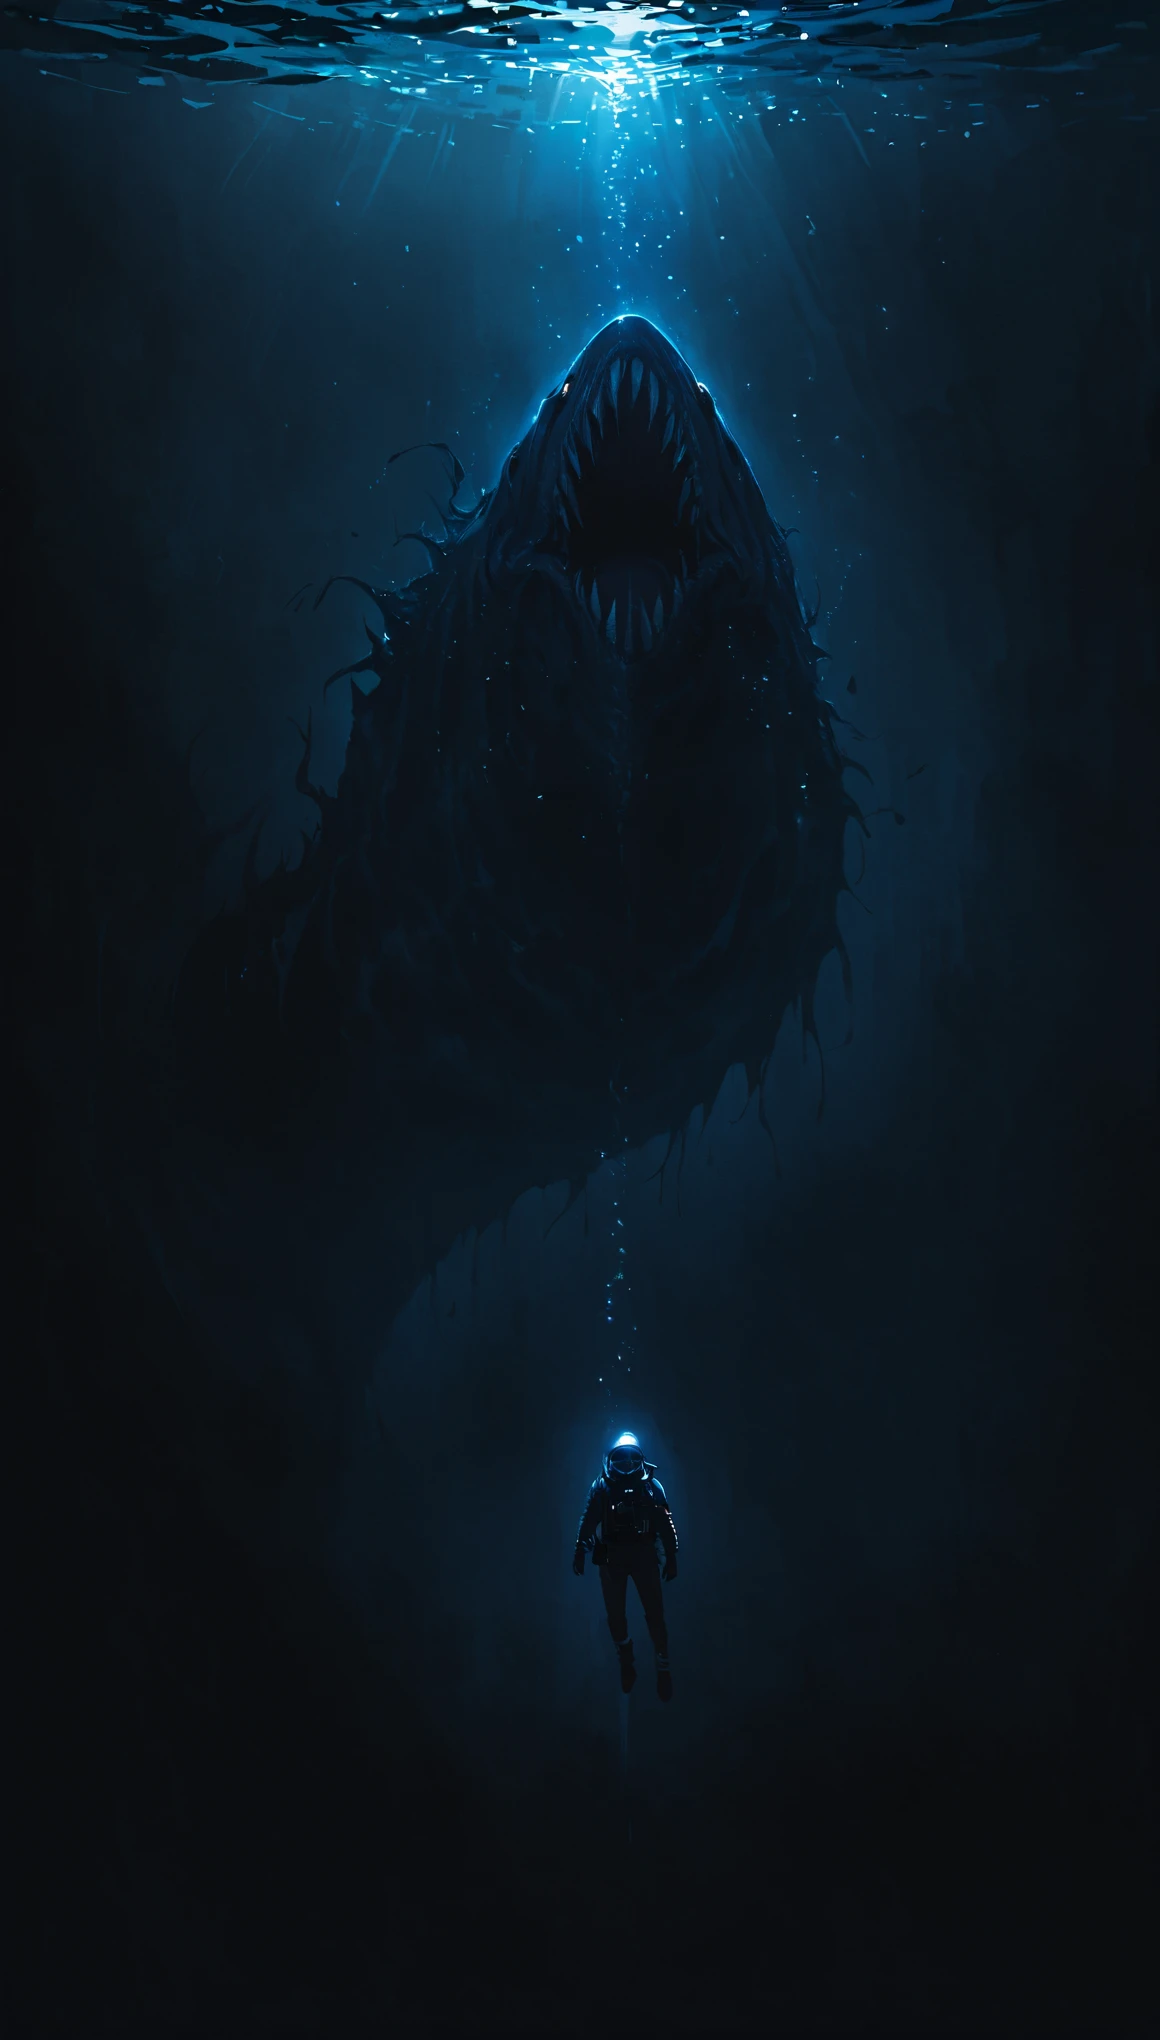 realistic oil painting, horror, free diving, breath-hold diving, The Deepest Free Dive Records, diving down without scuba gear, deep under water, huge face of sea monster in background behind diver, diver on first plan, monster on second plan, dark aura of deep water, toned colors, dark colors, low light, Low-key lighting v1.0